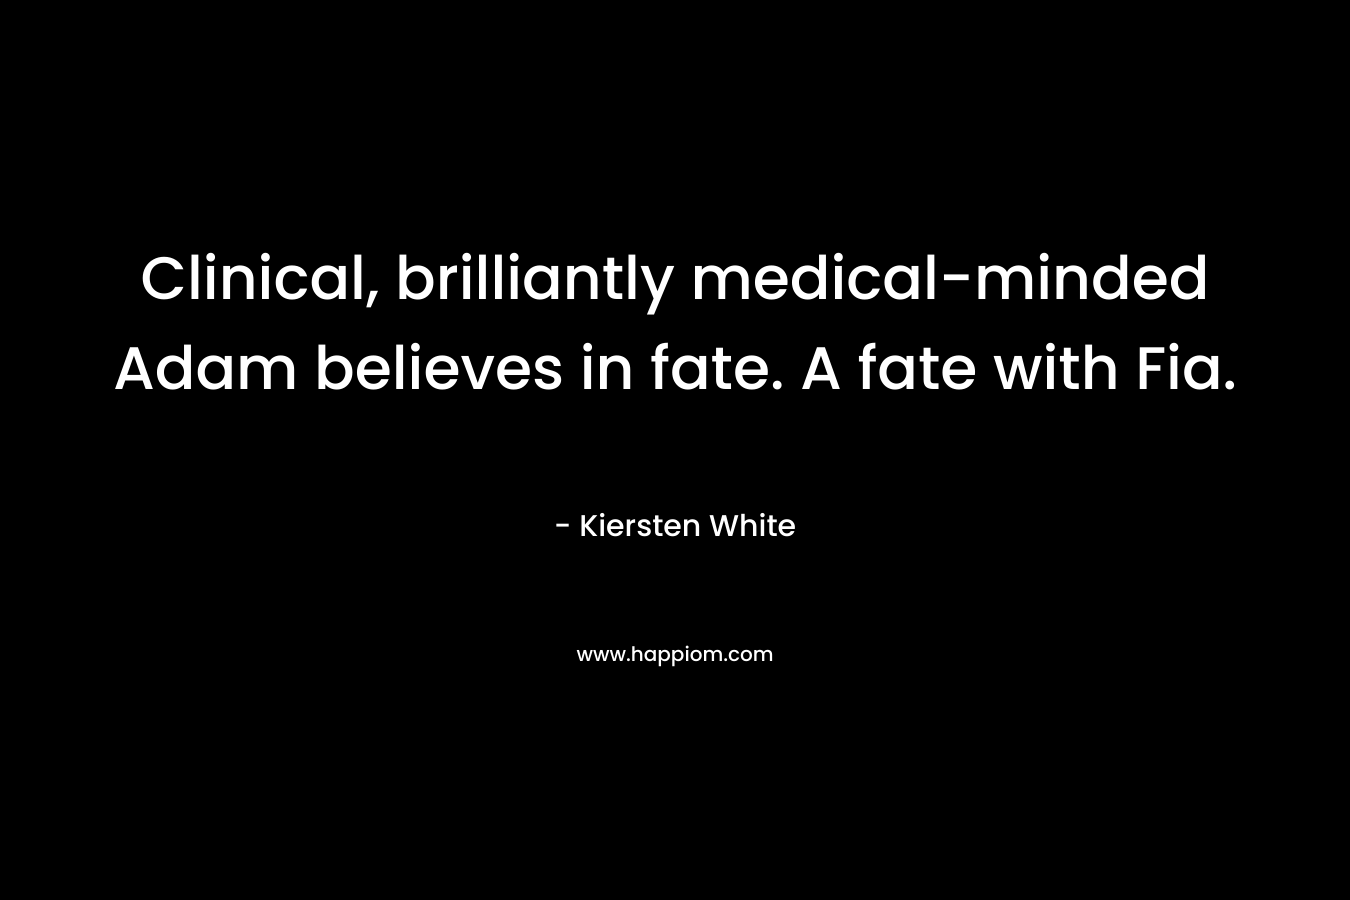 Clinical, brilliantly medical-minded Adam believes in fate. A fate with Fia. – Kiersten White